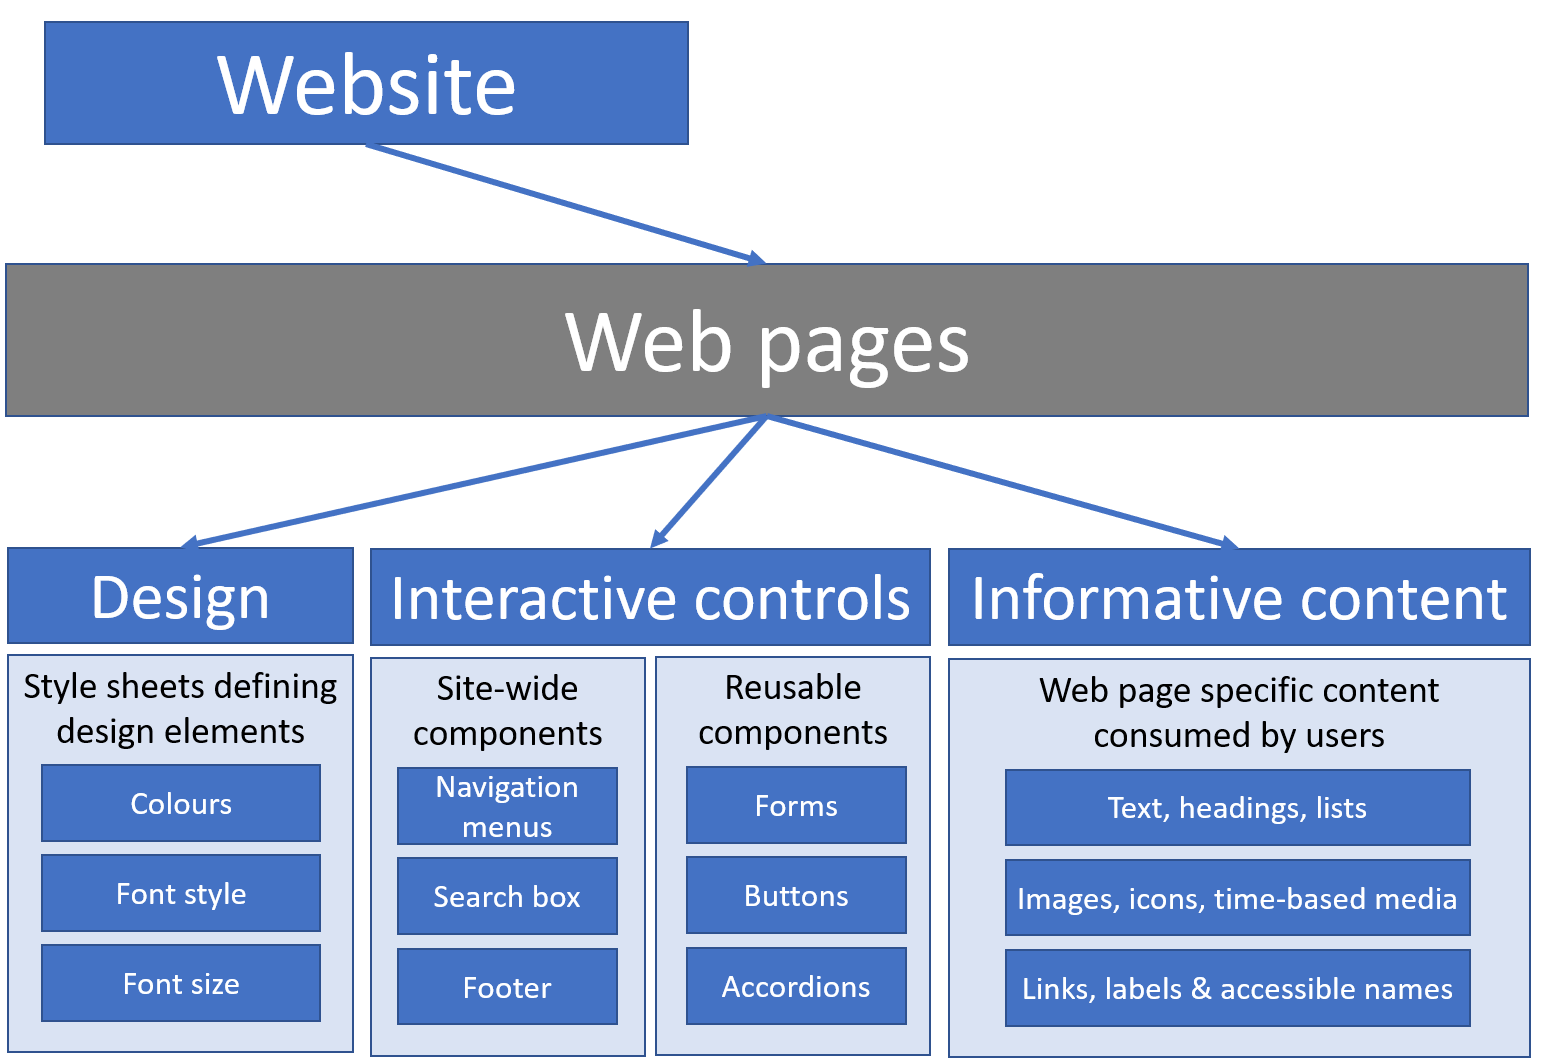 but it is an important question when you are considering if a website meets...